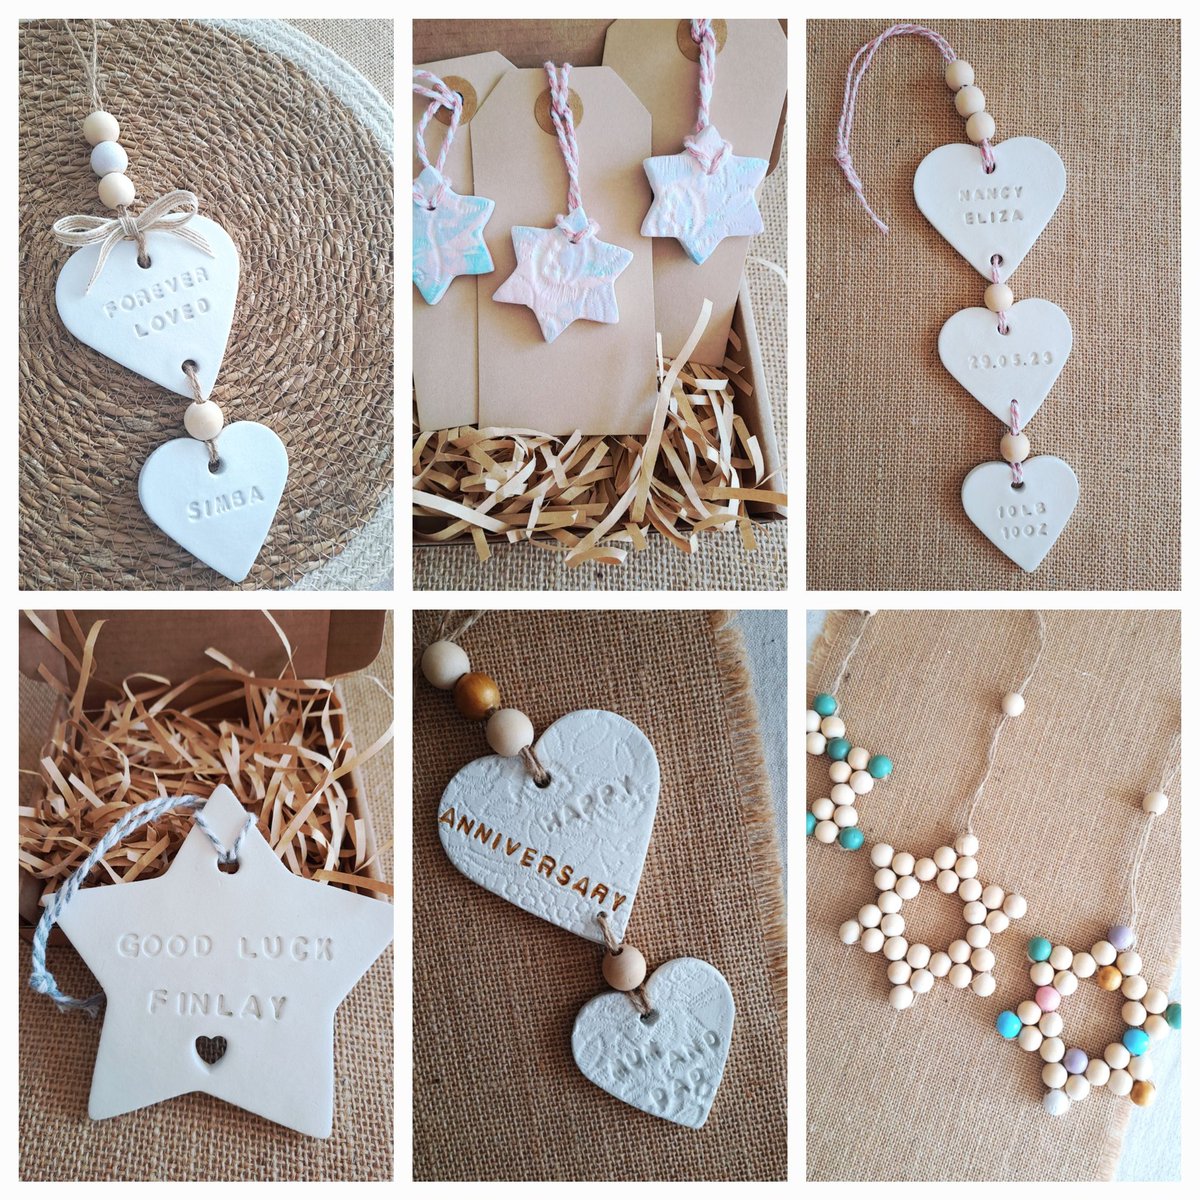 Clay keepsakes specially personalised for your loved one #loved #keepsake #goodluck #welldone